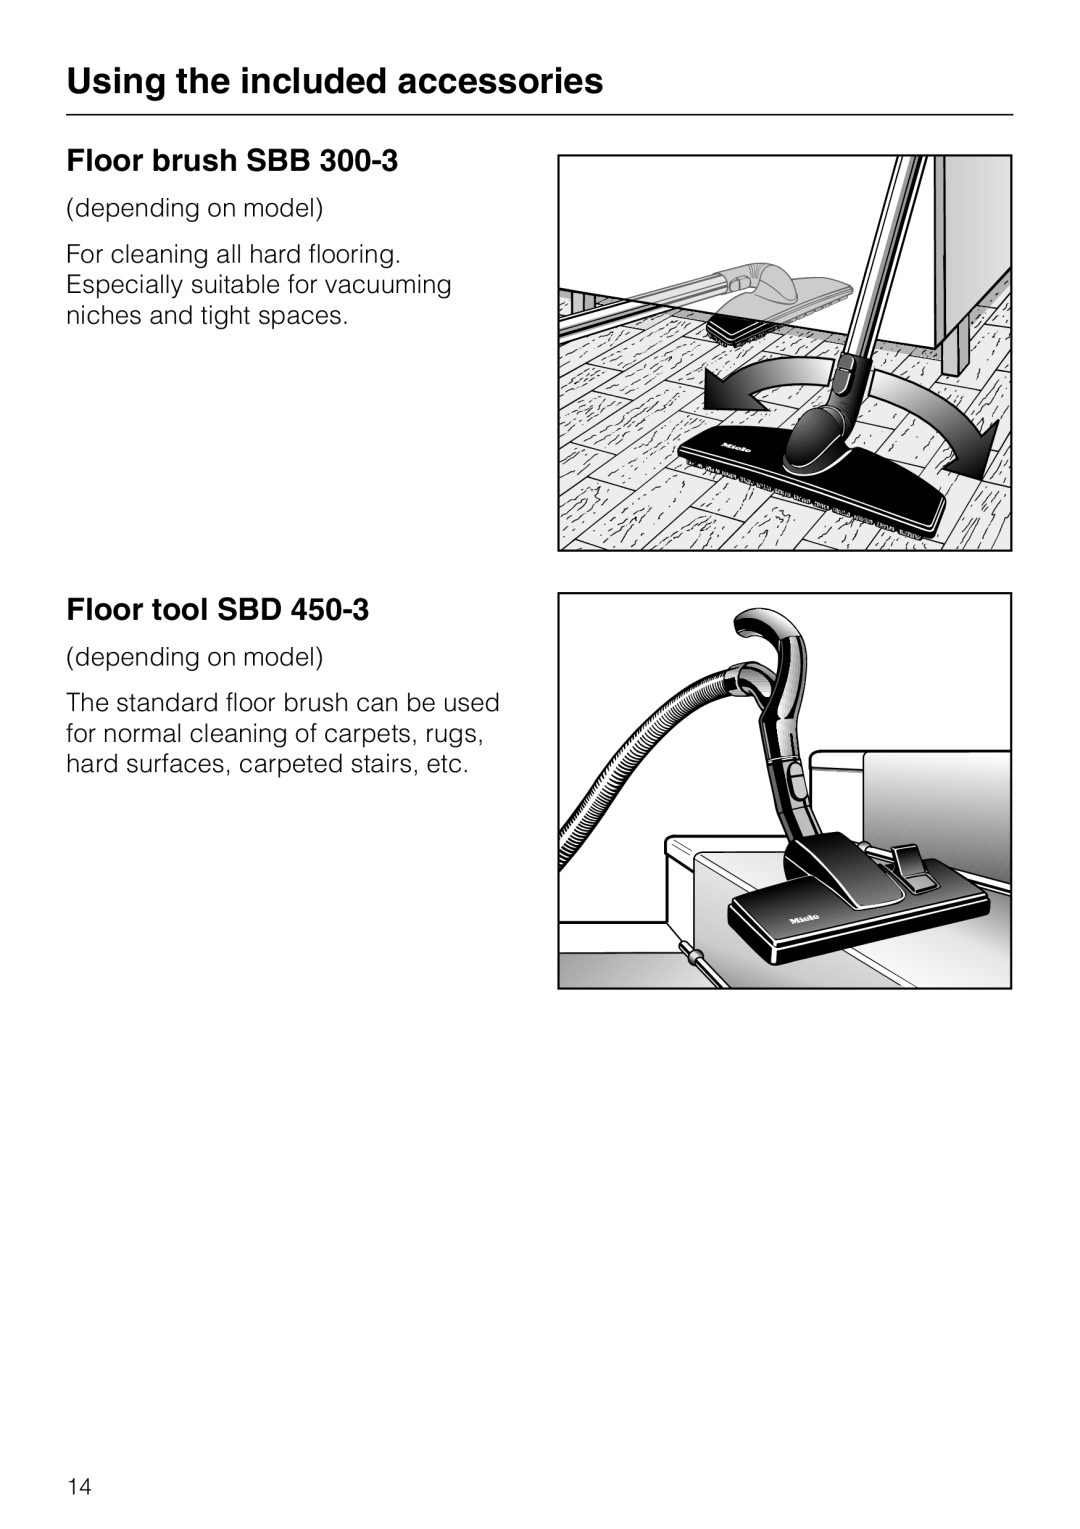 Miele S 4000 manual Using the included accessories, Floor brush SBB, Floor tool SBD, depending on model 